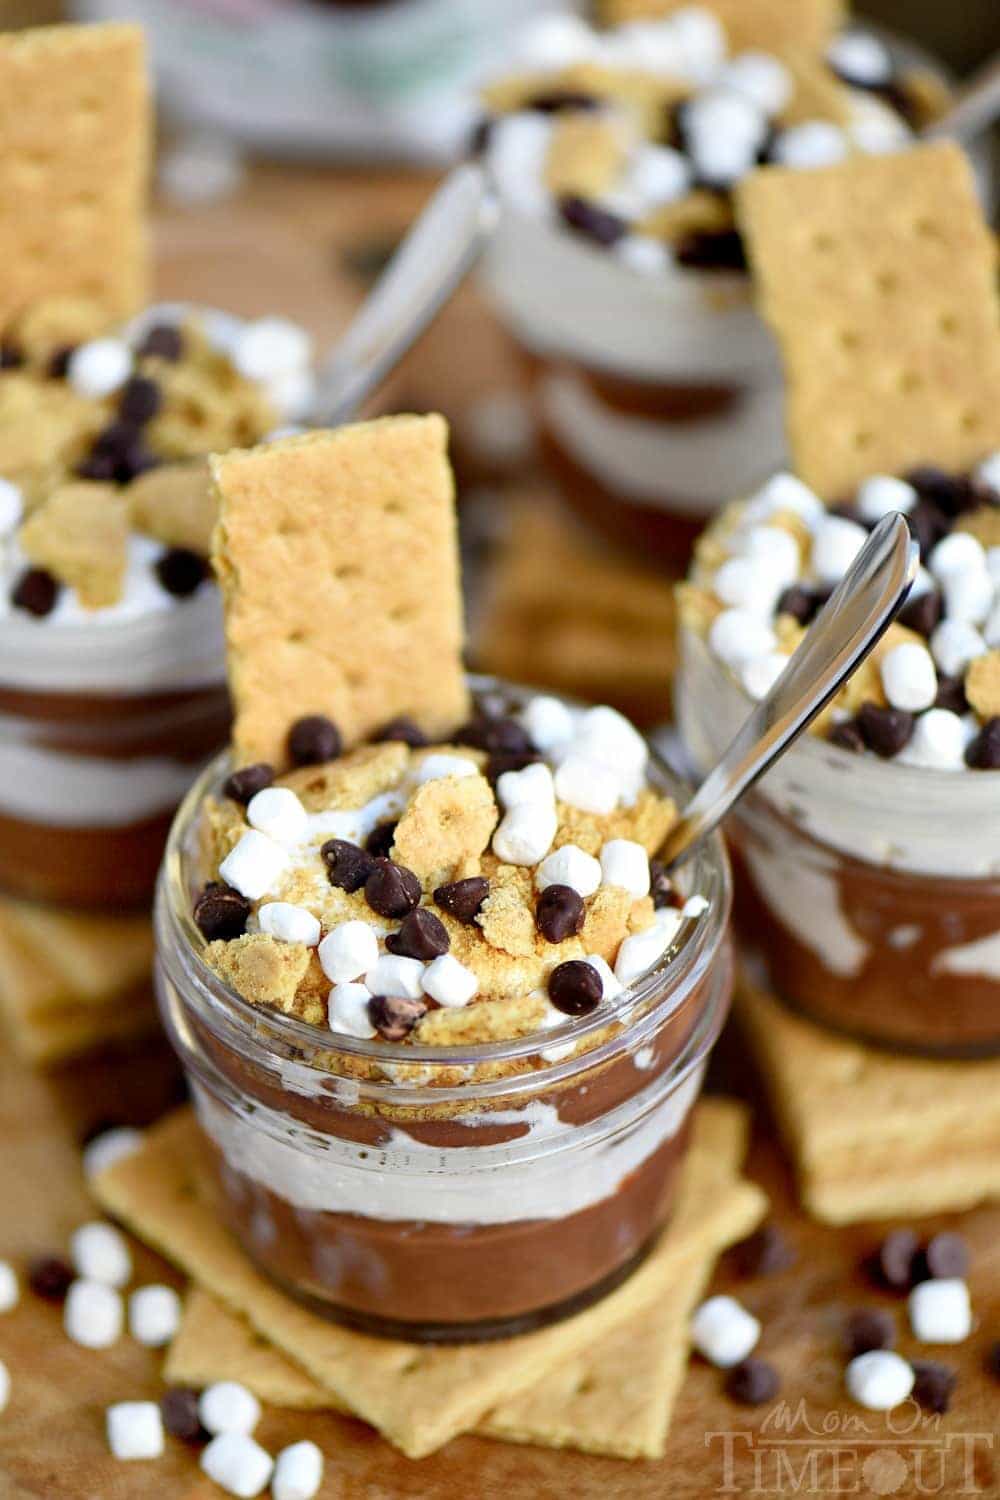 Welcome to your new favorite treat! These S'mores Pudding Parfaits are the perfect easy dessert made with new JELL-O SIMPLY GOOD pudding mix! Simple, sweet goodness that is impossible to resist! // Mom On Timeout #ad